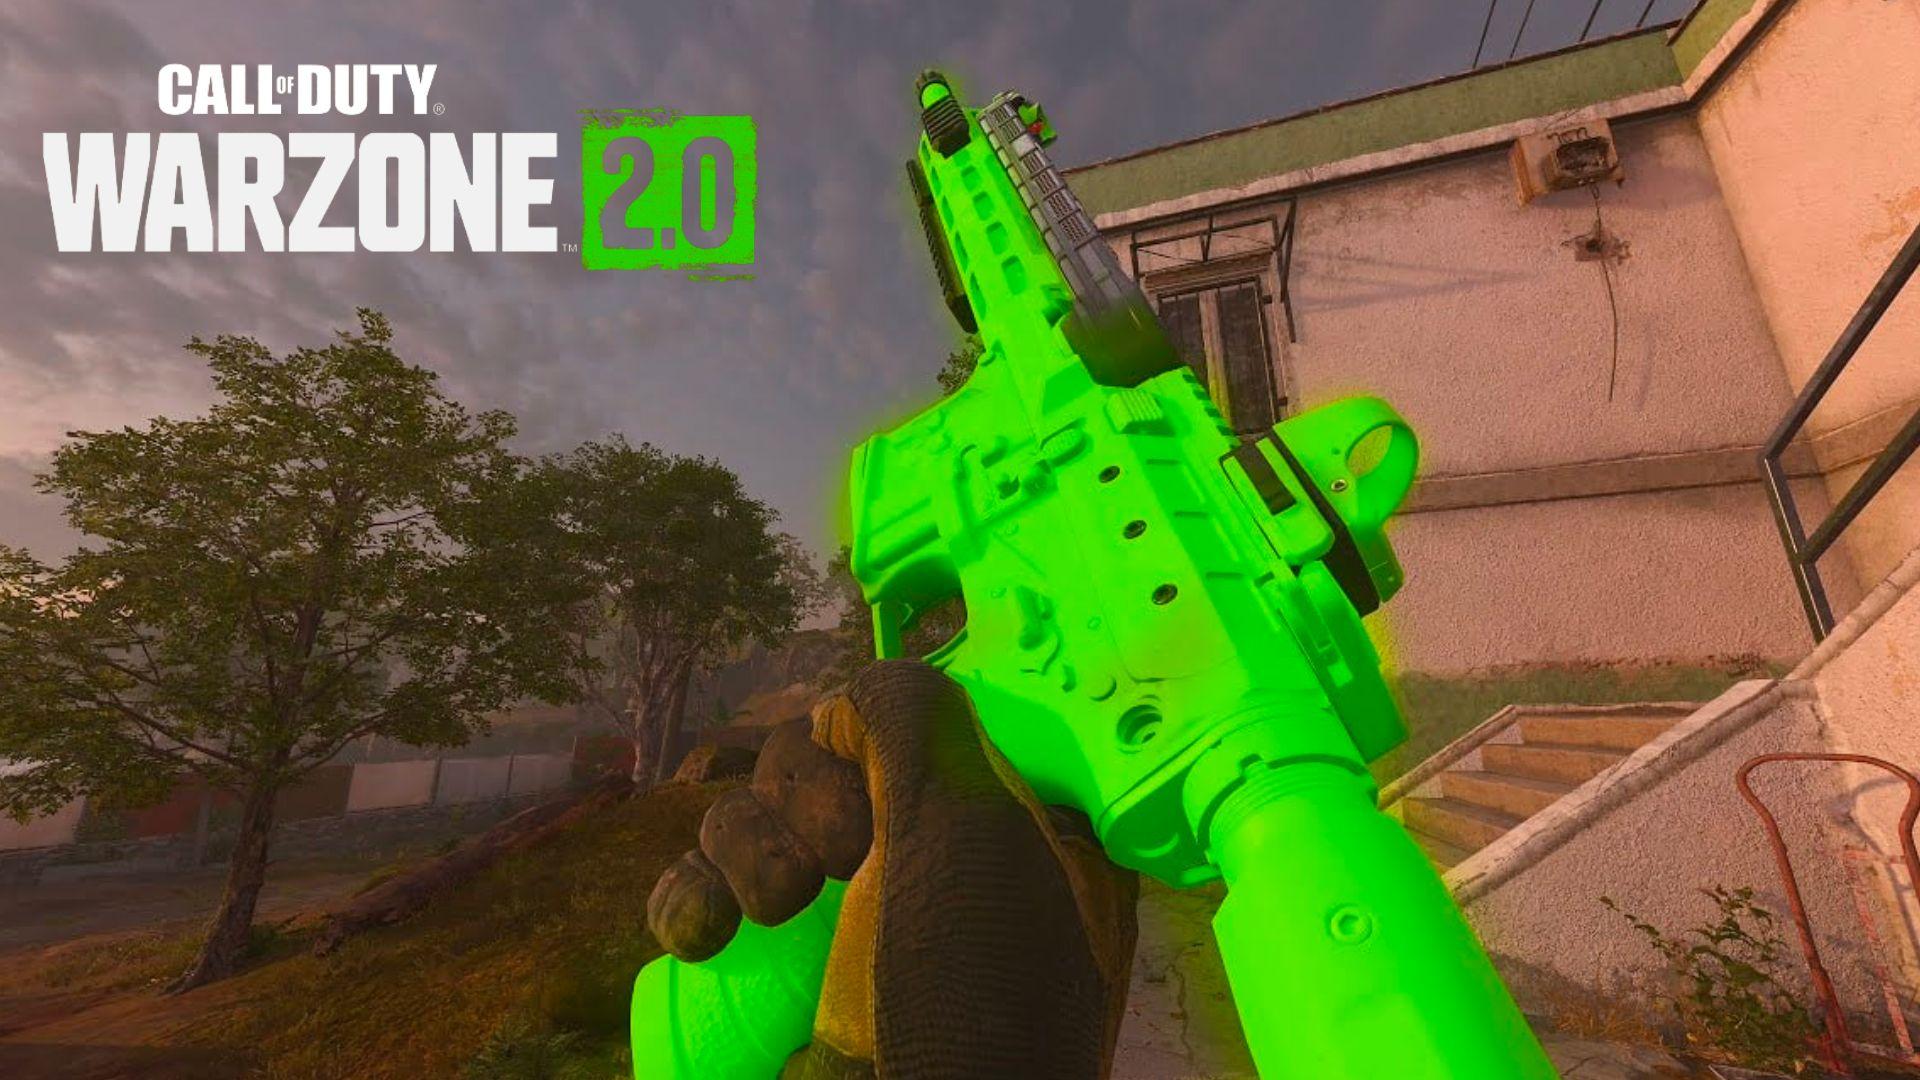 Warzone season two reloaded meta - Best guns to use in Warzone 2